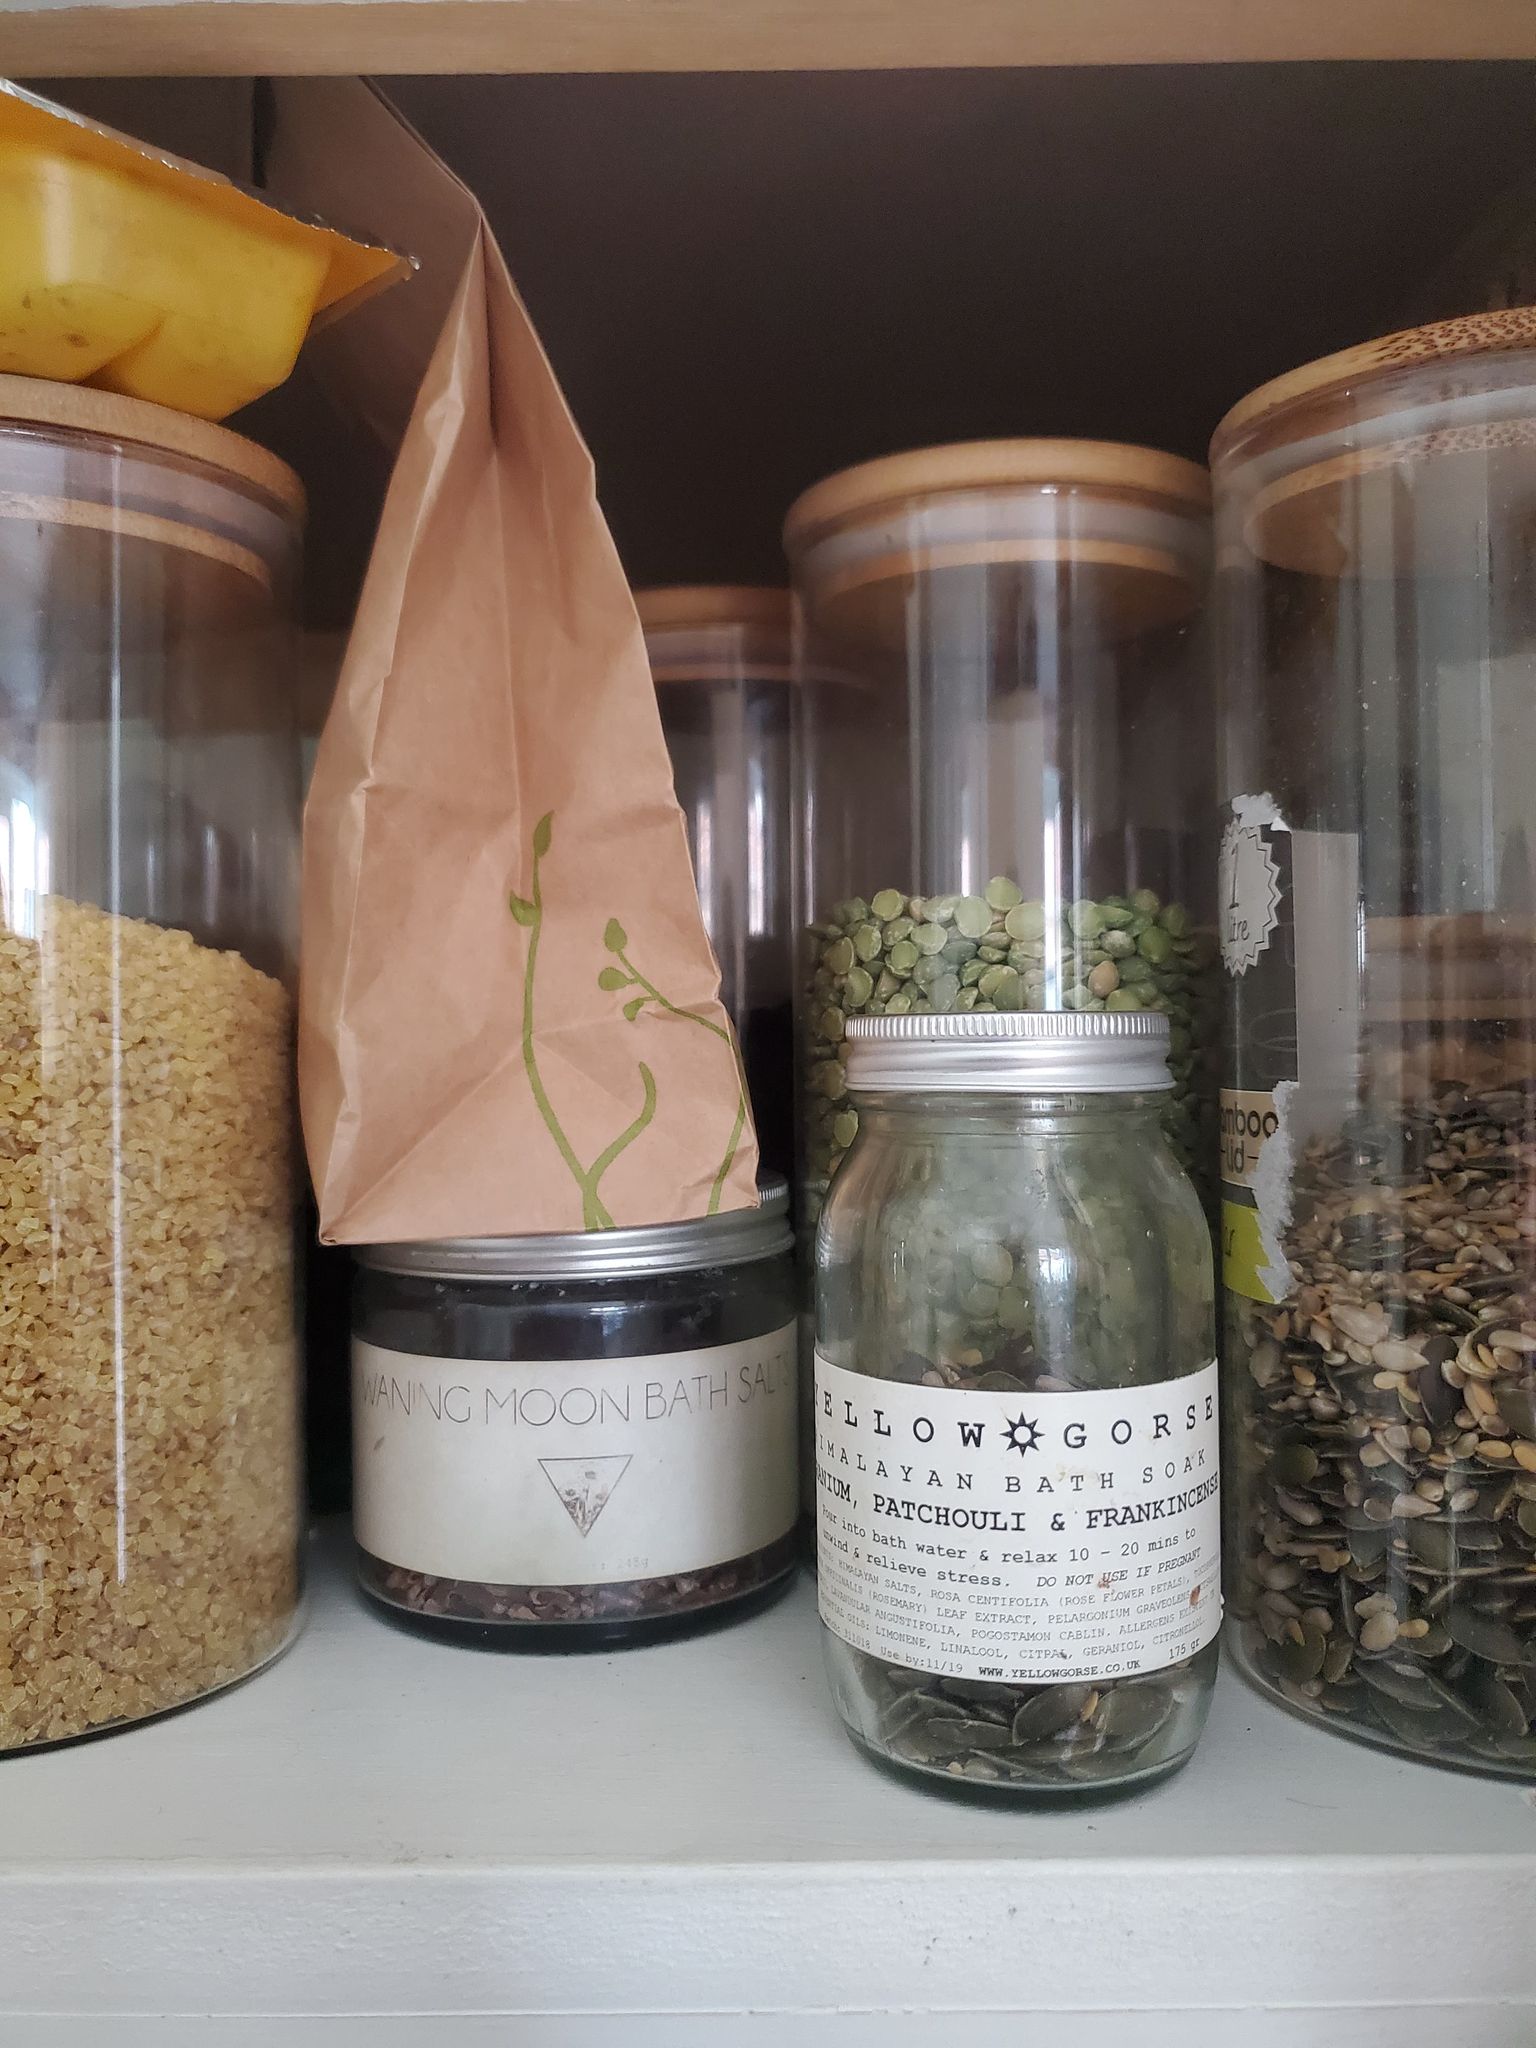 repurposed upcycled beauty product packaging used for pantry organization and reduce food waste